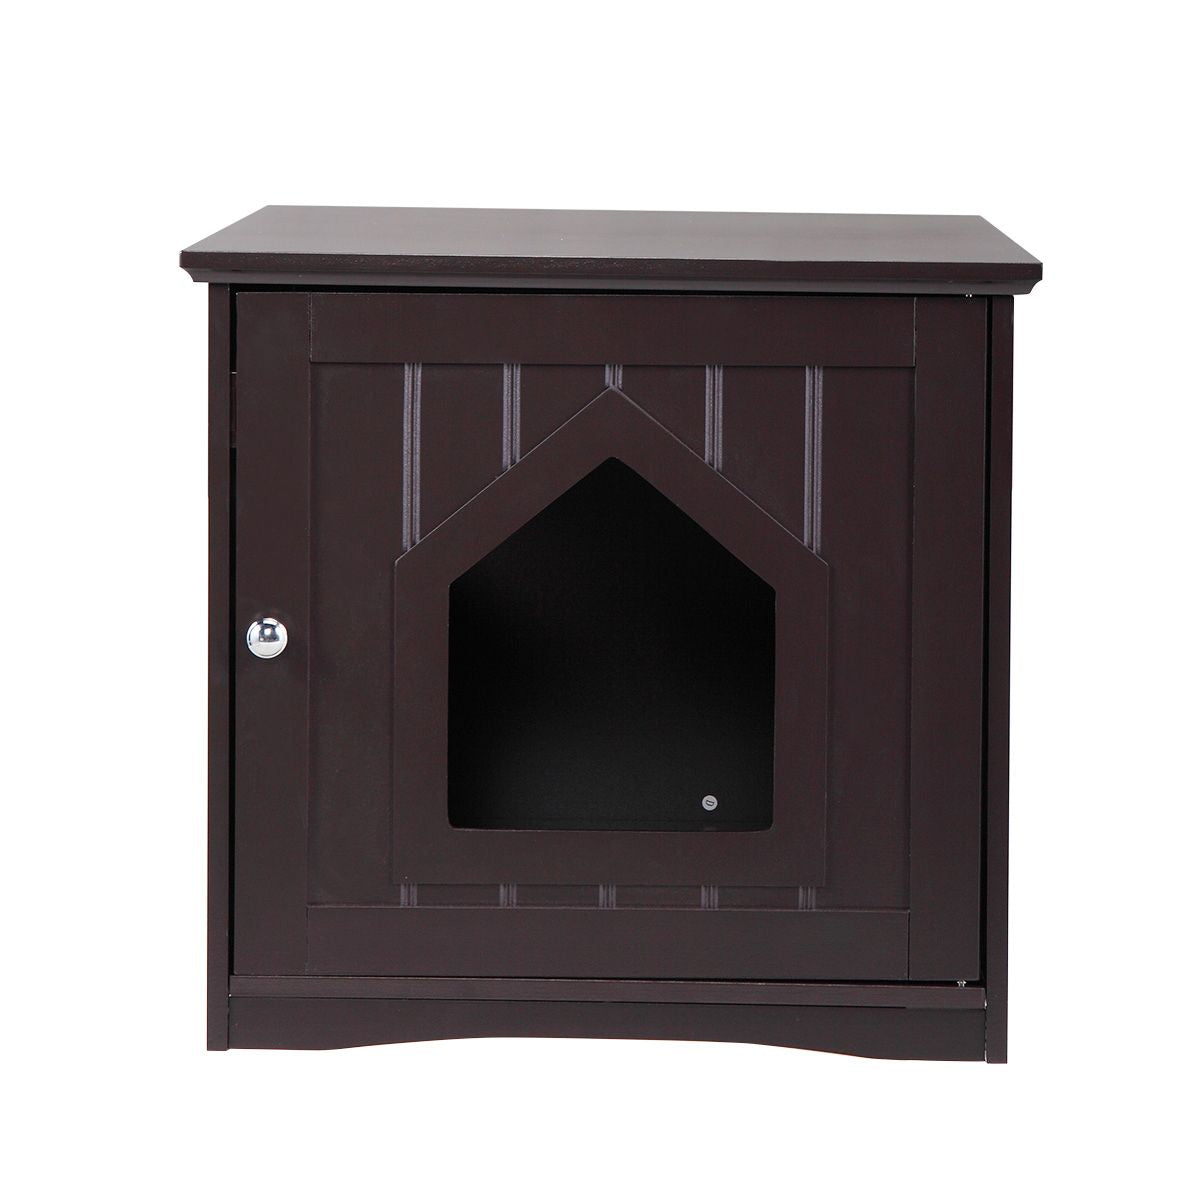 SHICHENG Decorative Cat House & Side Table - Cat Home Covered Nightstand - Indoor Pet Crate - Litter Box Enclosure - Hooded Hidden Pet Box - Cats Furniture Cabinet - Kitty Washroom Animals & Pet Supplies > Pet Supplies > Cat Supplies > Cat Furniture SHICHENG   